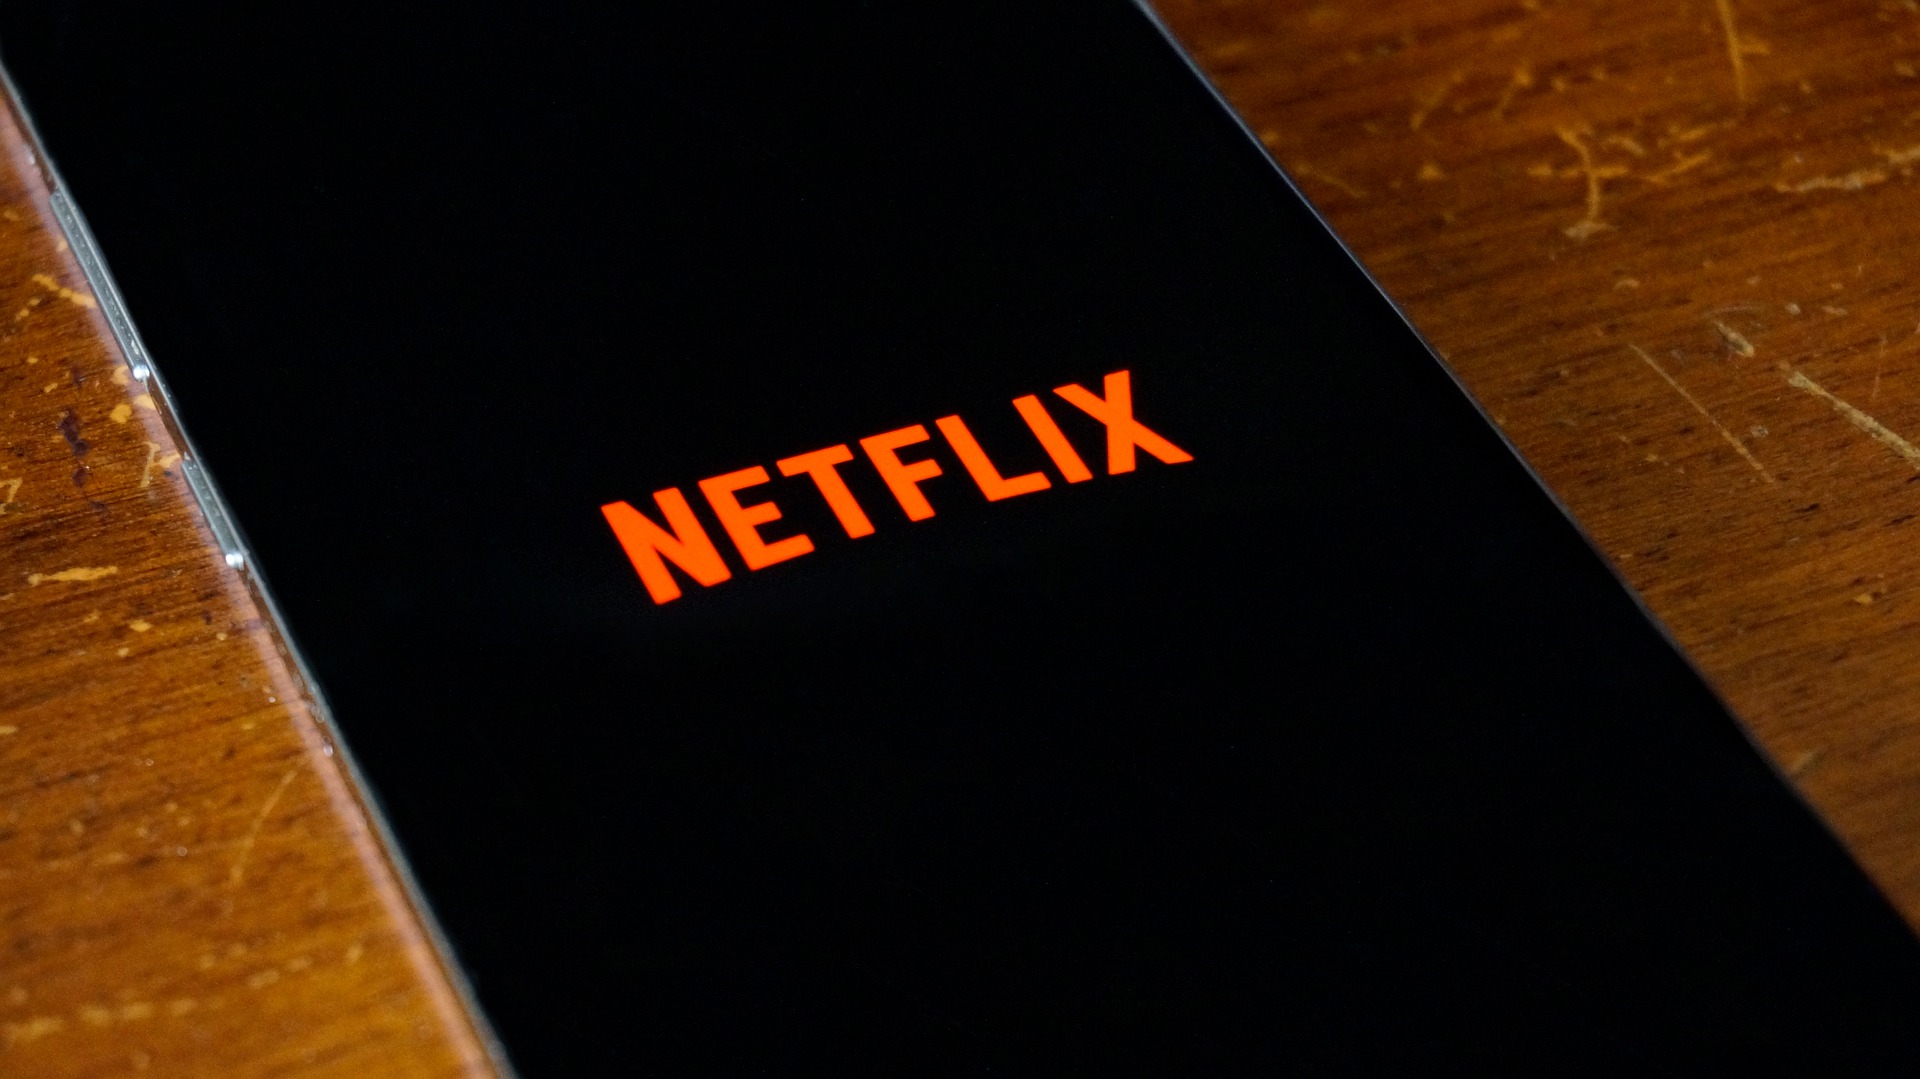 ‘Anyone’ Could Have Built Netflix, According To Its Co-Founder